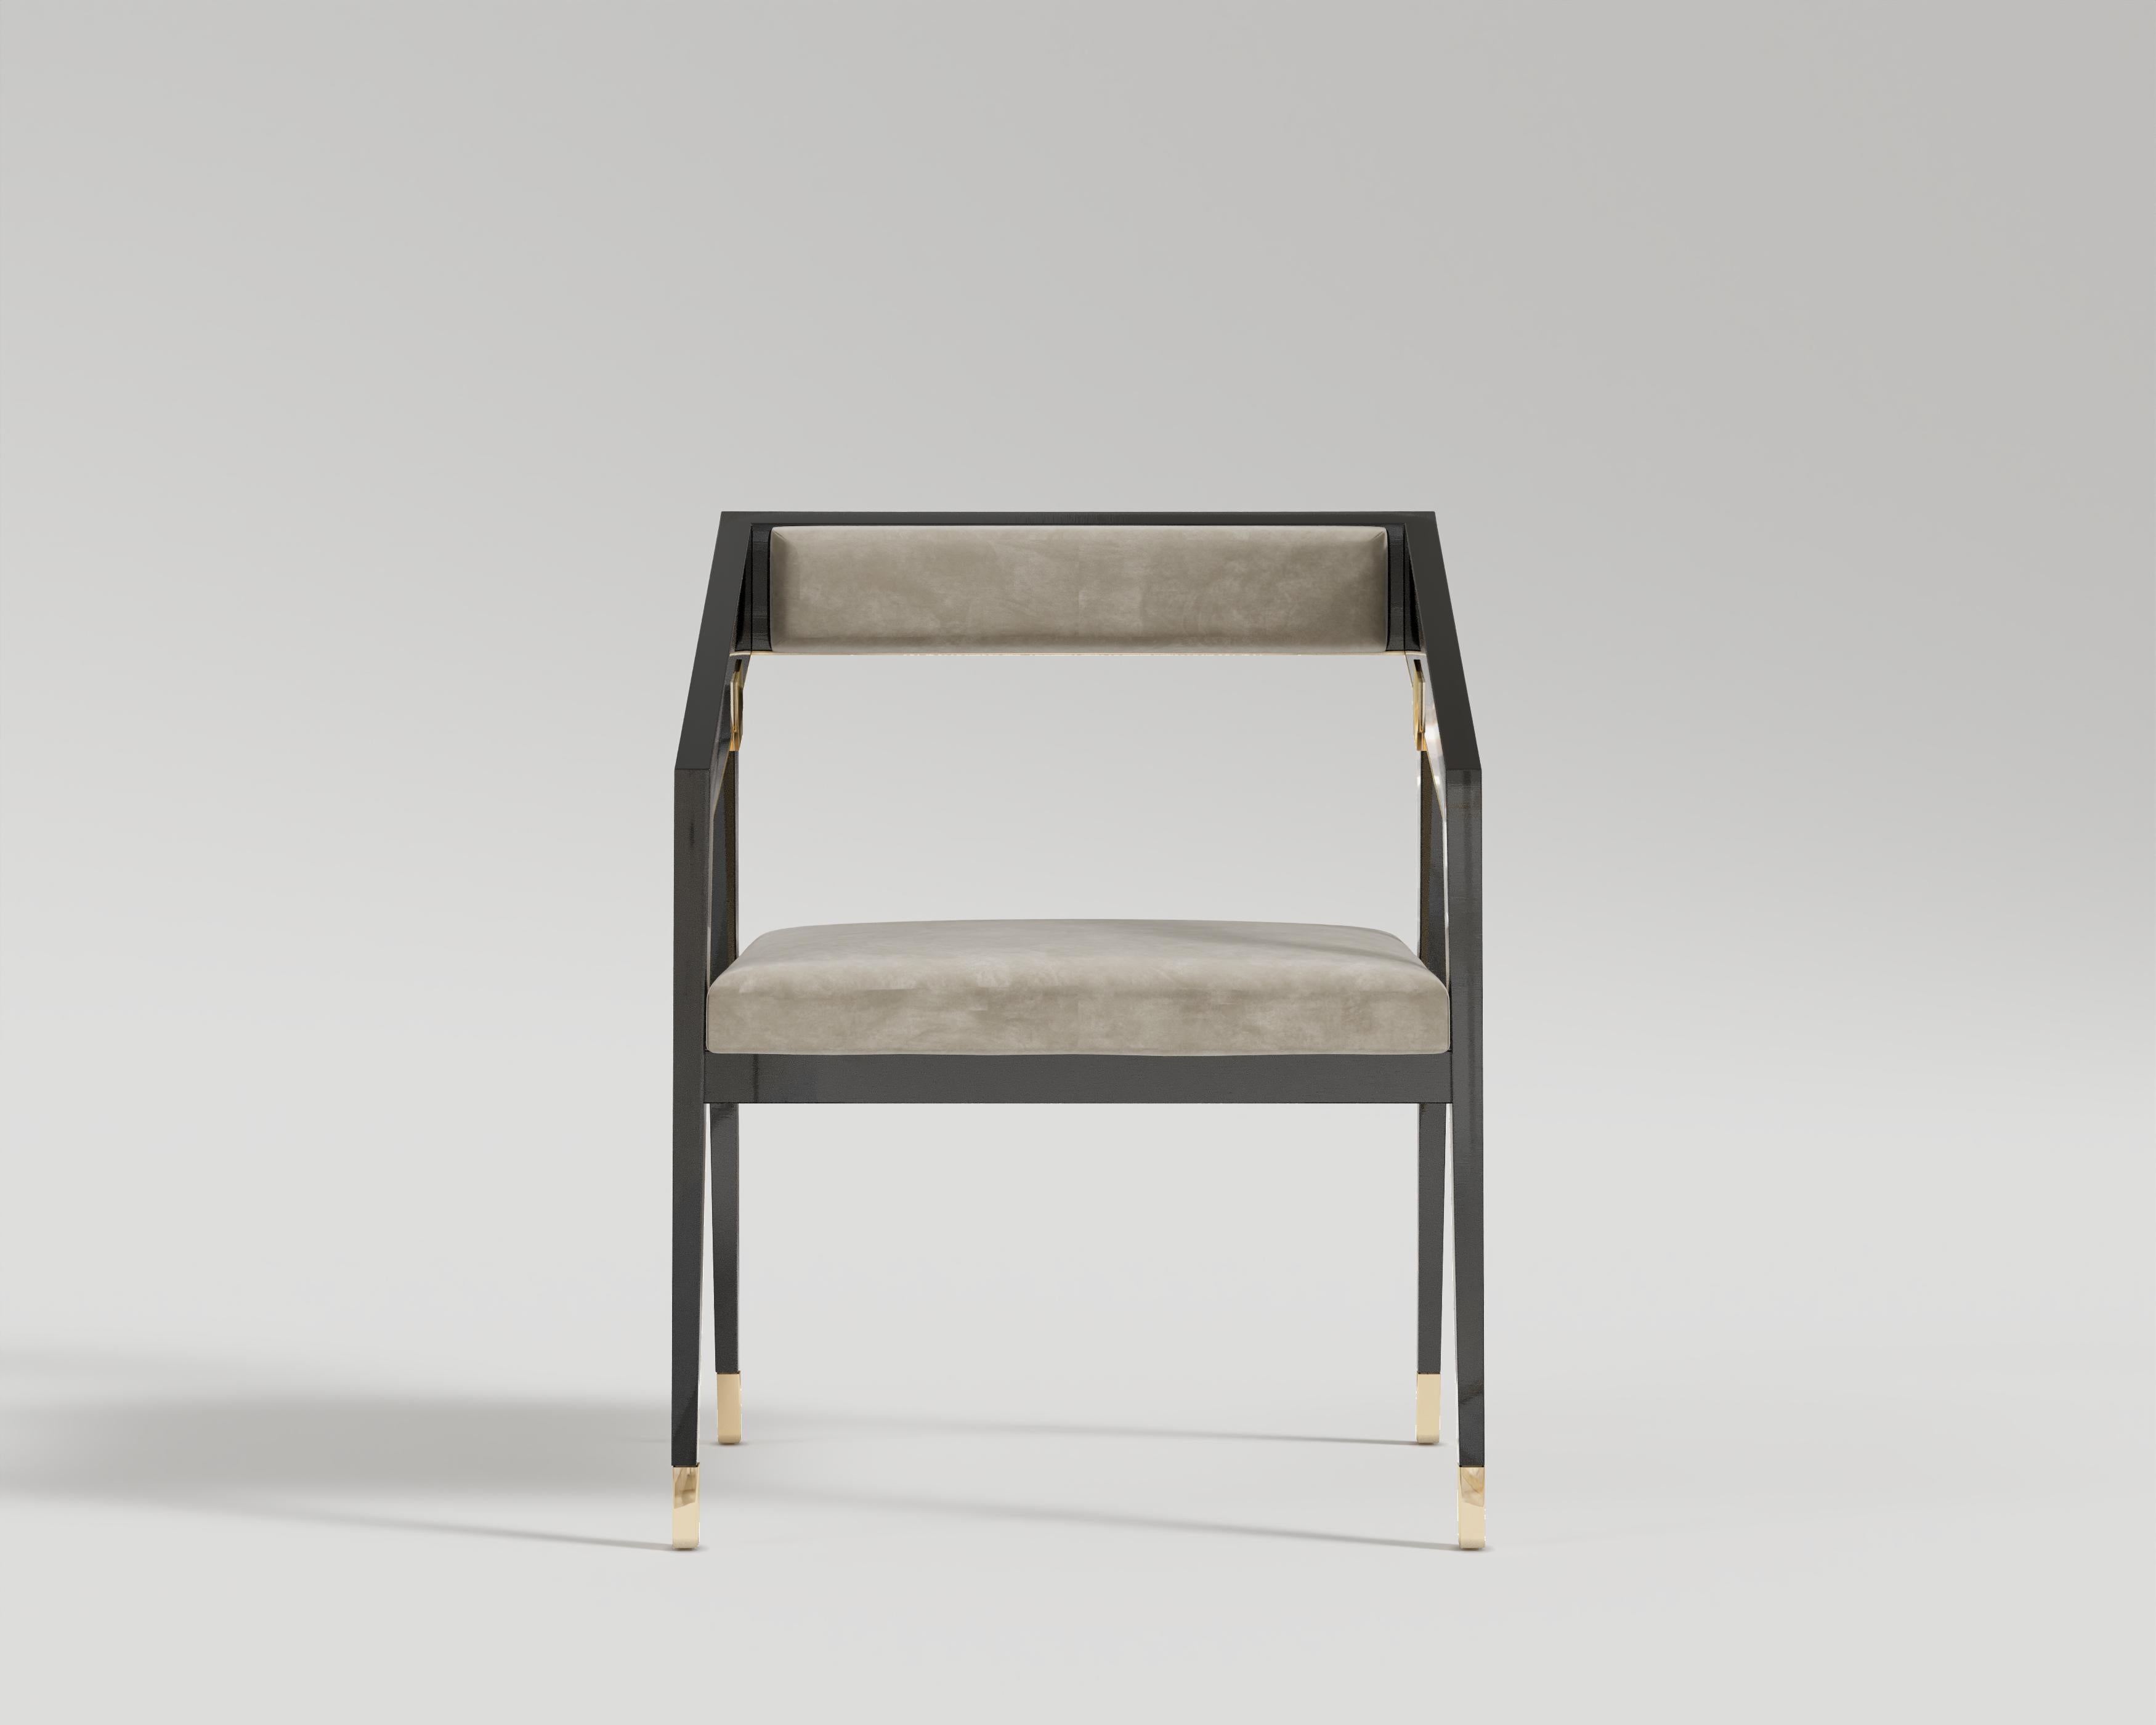 Parma Dining Chair
An elegant modern art deco design brings a timeless silhouette and exudes luxury within the home. Black lacquer frame with elegant polished bronze details and accommodating seat and backrest filled with premium